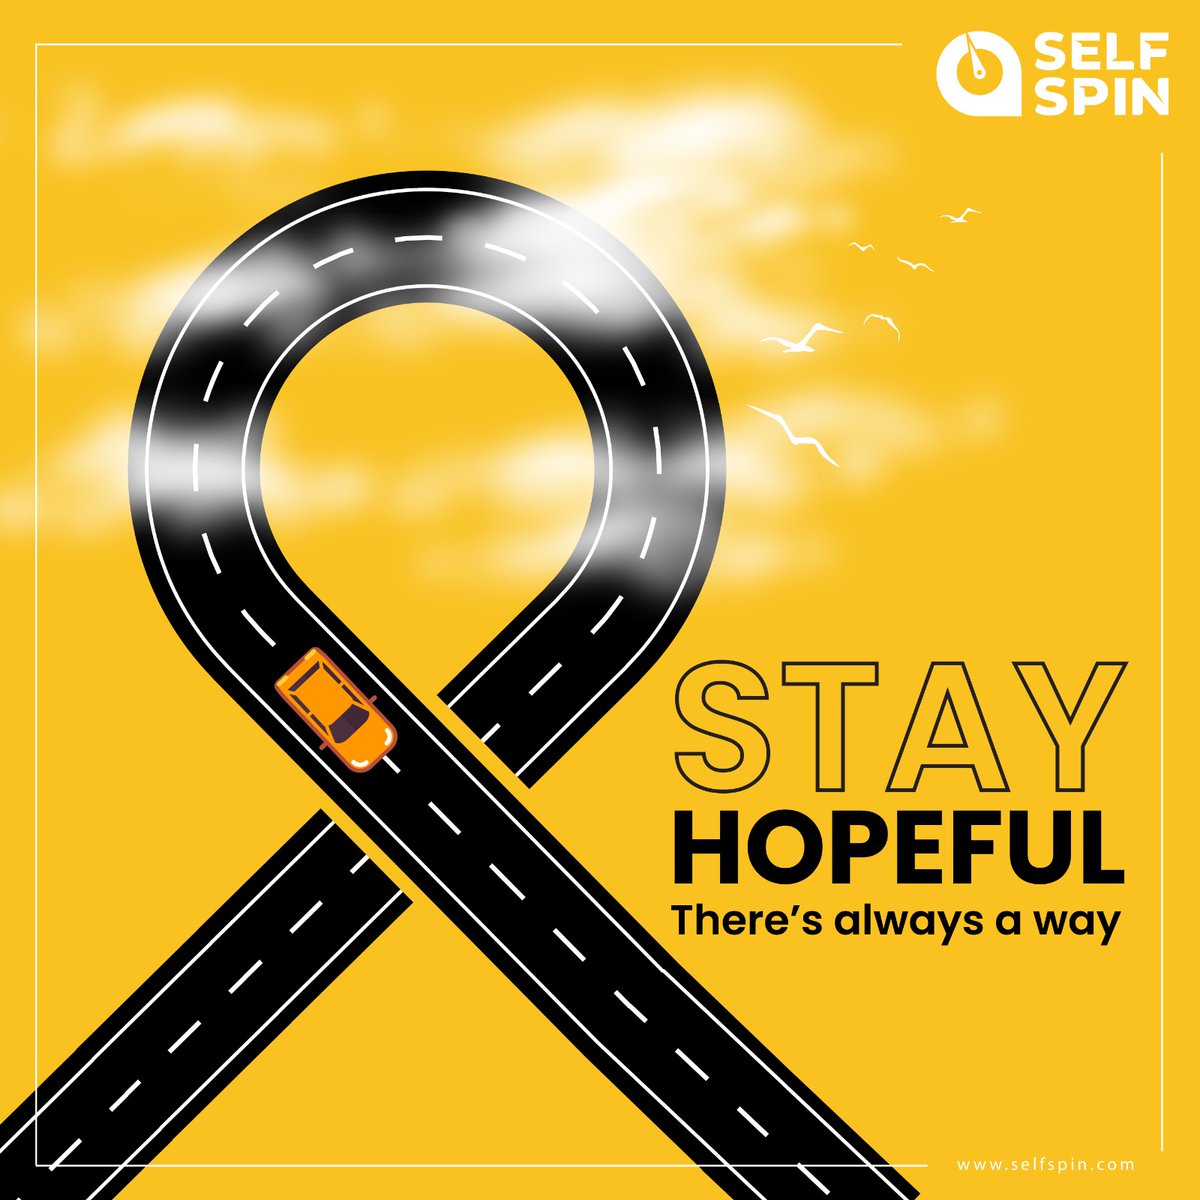 Embrace Hope in Every Cancer Journey, There's Always a Way!

Pledge today to adopt a healthy lifestyle, be vigilant about potential signs and symptoms of cancer, and undergo regular screening.

#NationalCancerAwarenessDay #CancerAwareness #FightAgainstCancer #CancerFreeIndia